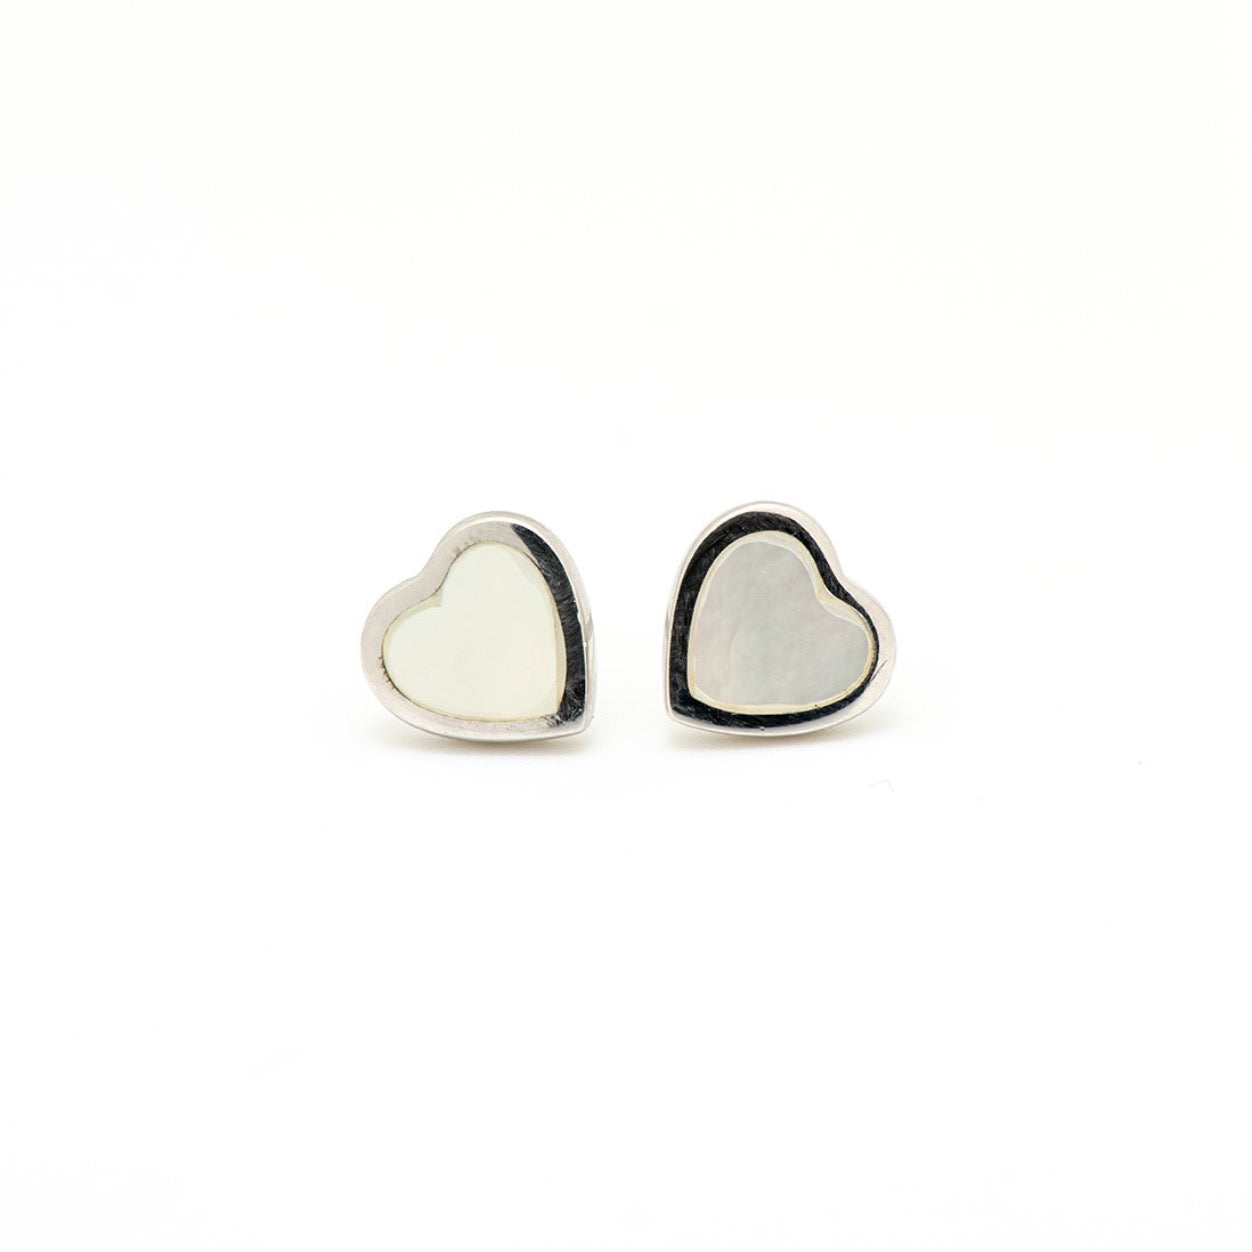 DK-925-096 silver hearts with mother of pearl